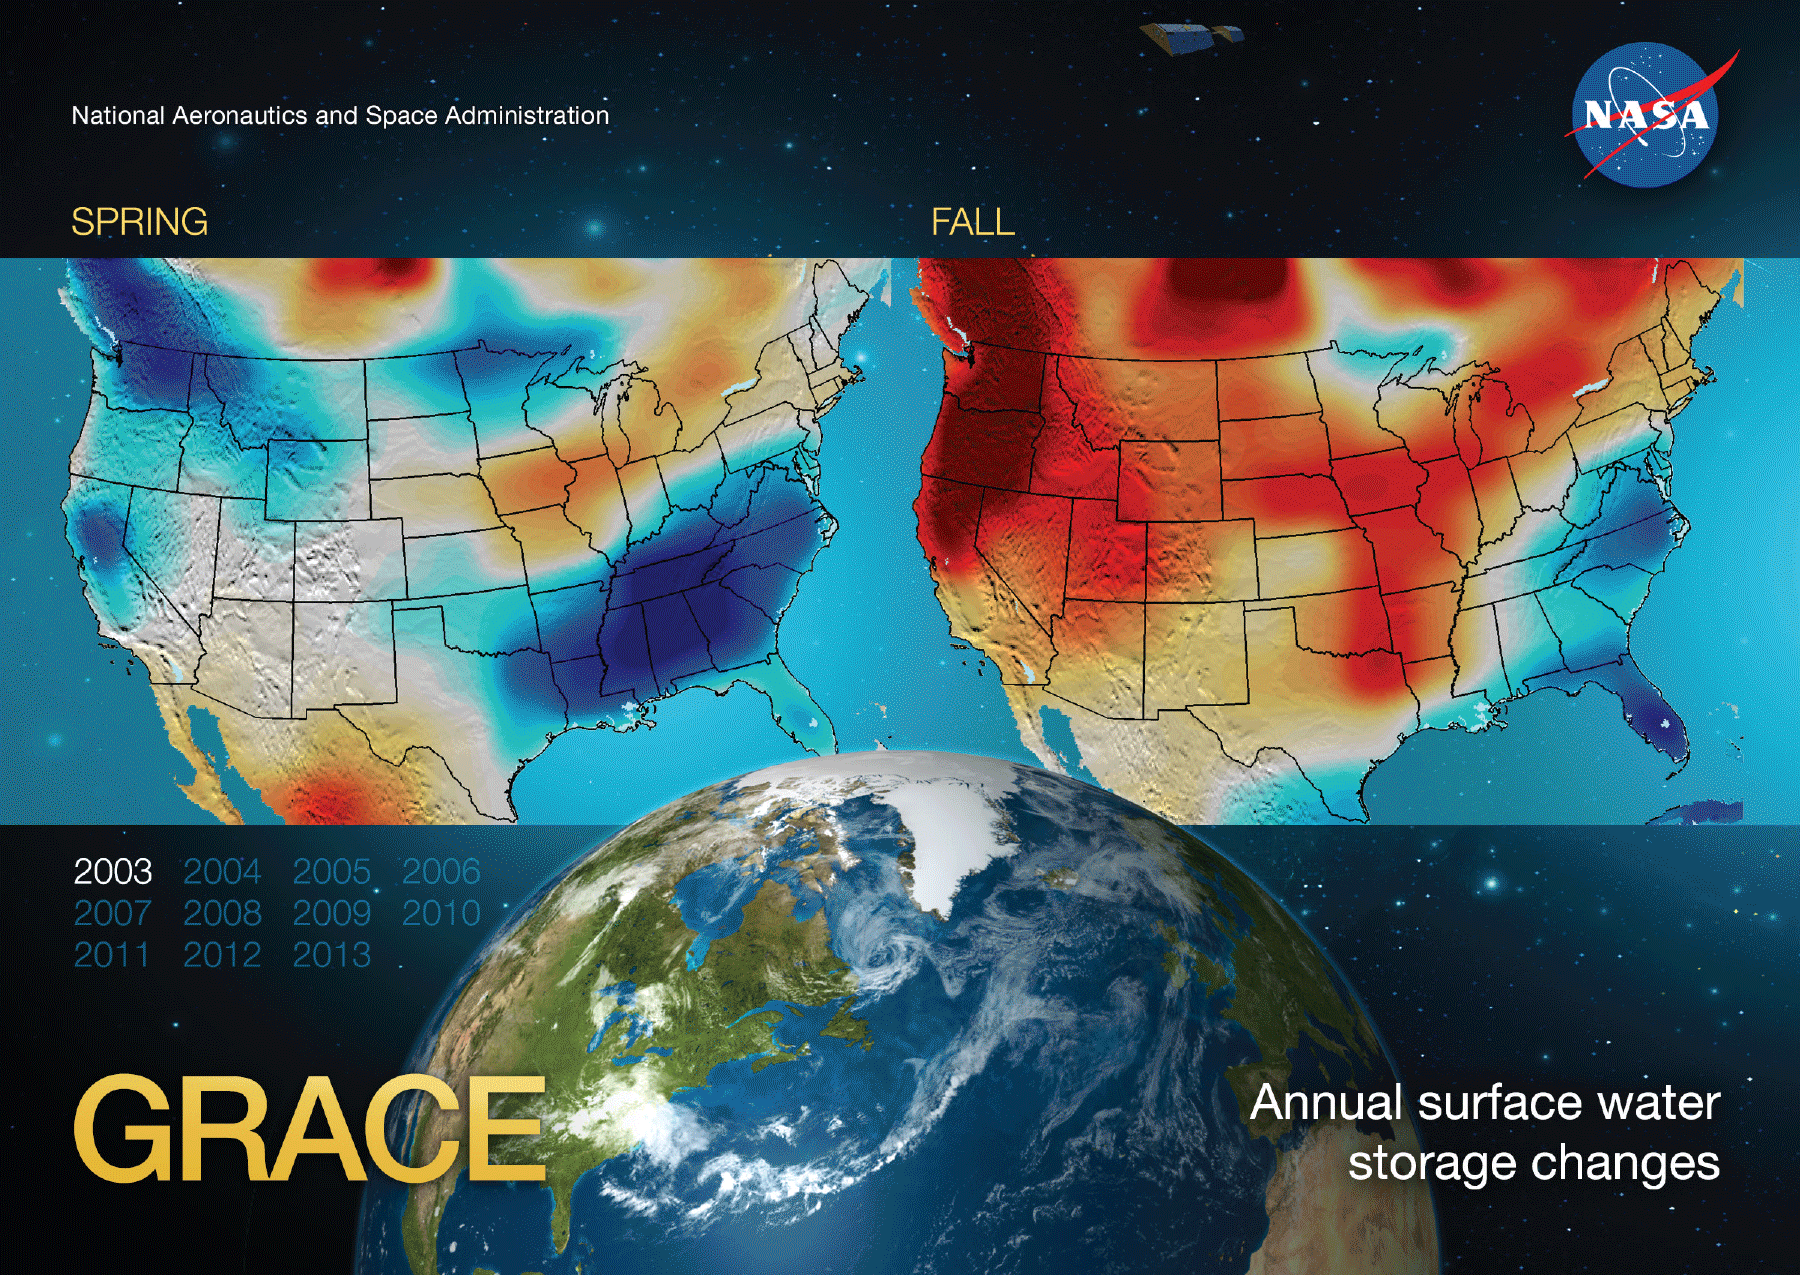 This animation shows the annual water storage changes over the U.S. from GRACE from 2003 - 2013.